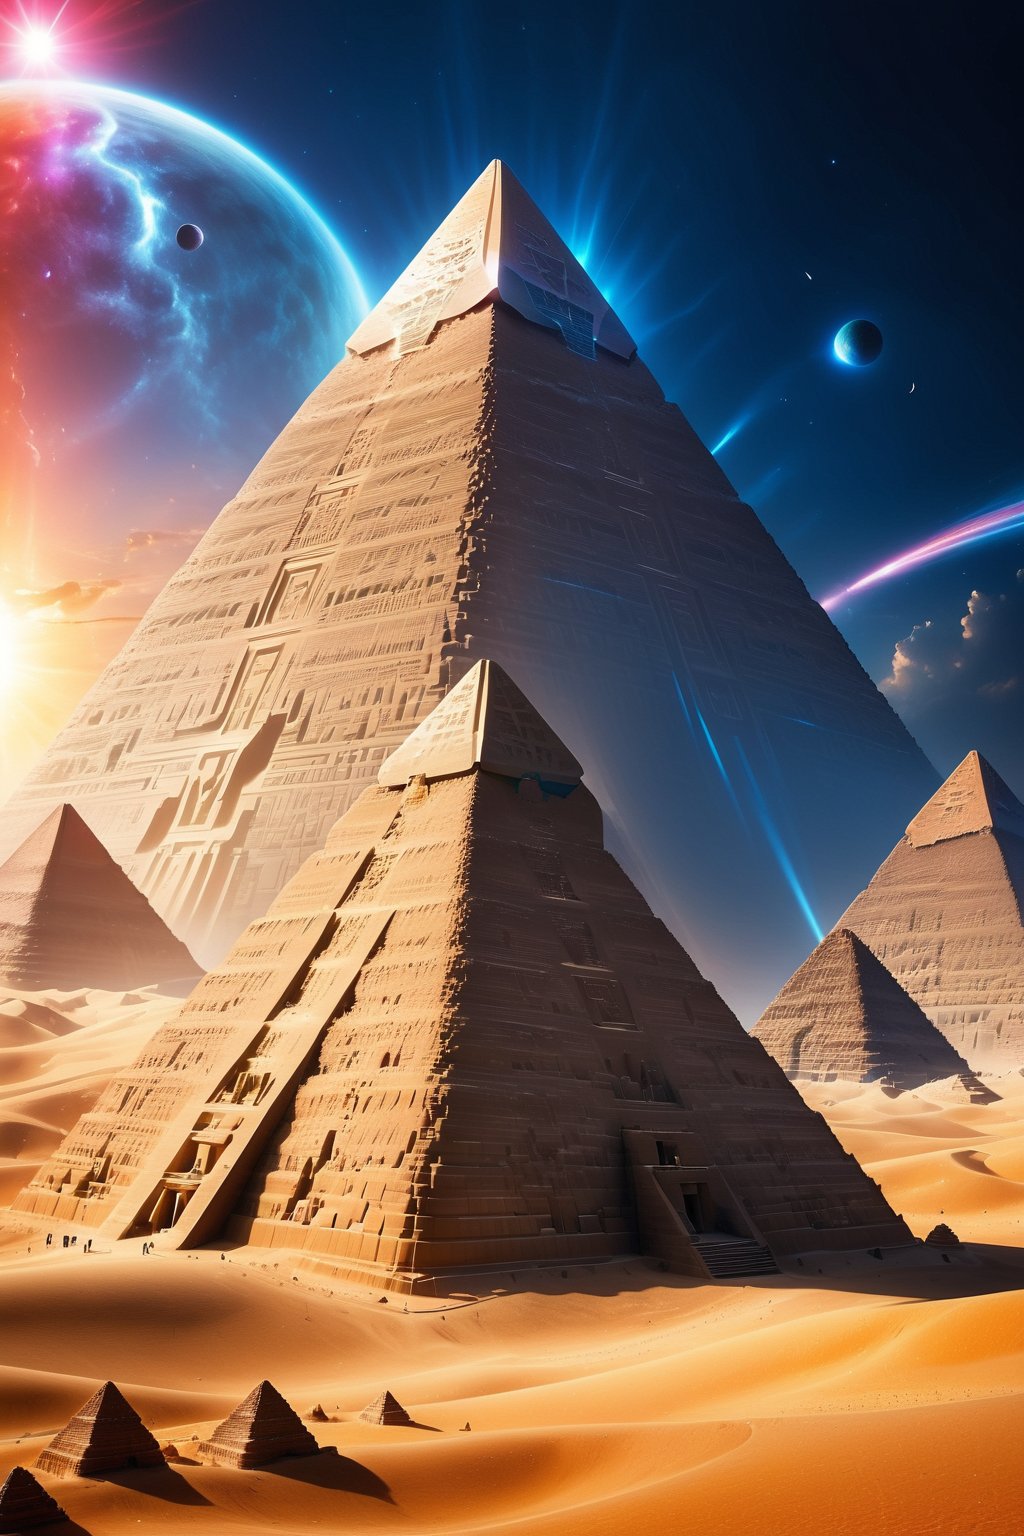 Unleash your imagination and explore the possibilities of a parallel universe - envision a sky filled with UFOs hovering over the iconic Egyptian pyramids, their sleek metallic bodies a stark contrast to the sandy landscape.